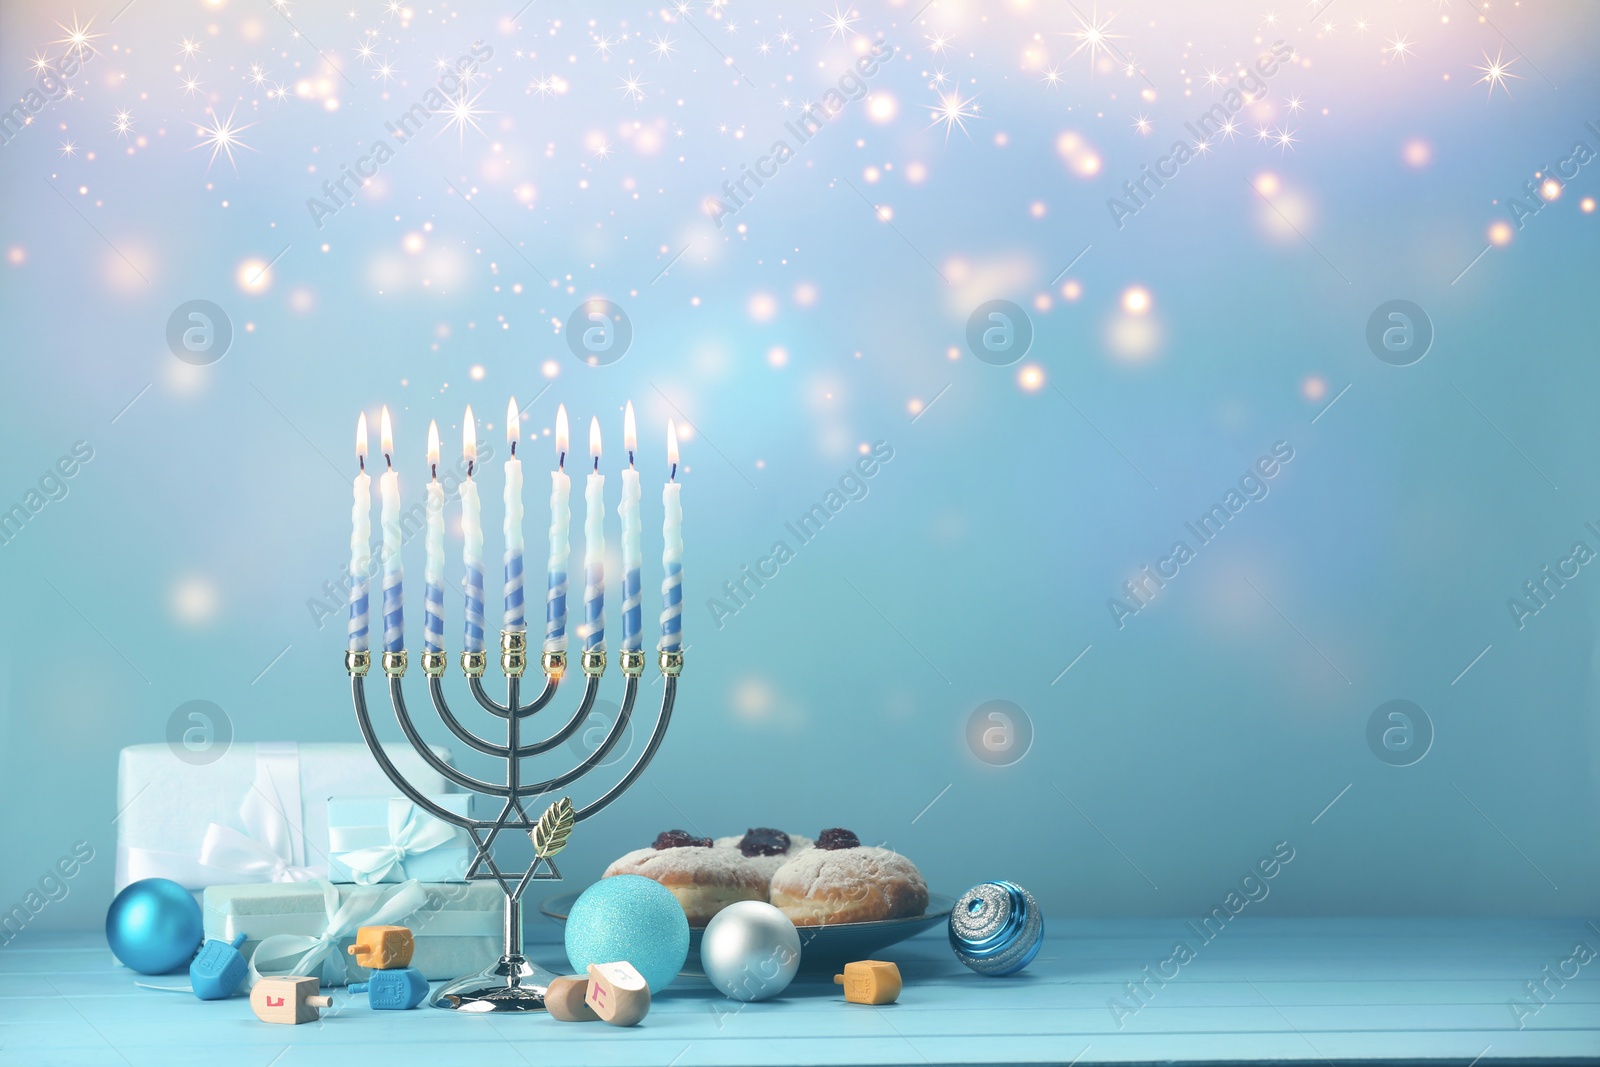 Image of Hanukkah celebration. Menorah with burning candles, dreidels, donuts and gift boxes on light blue wooden table, space for text